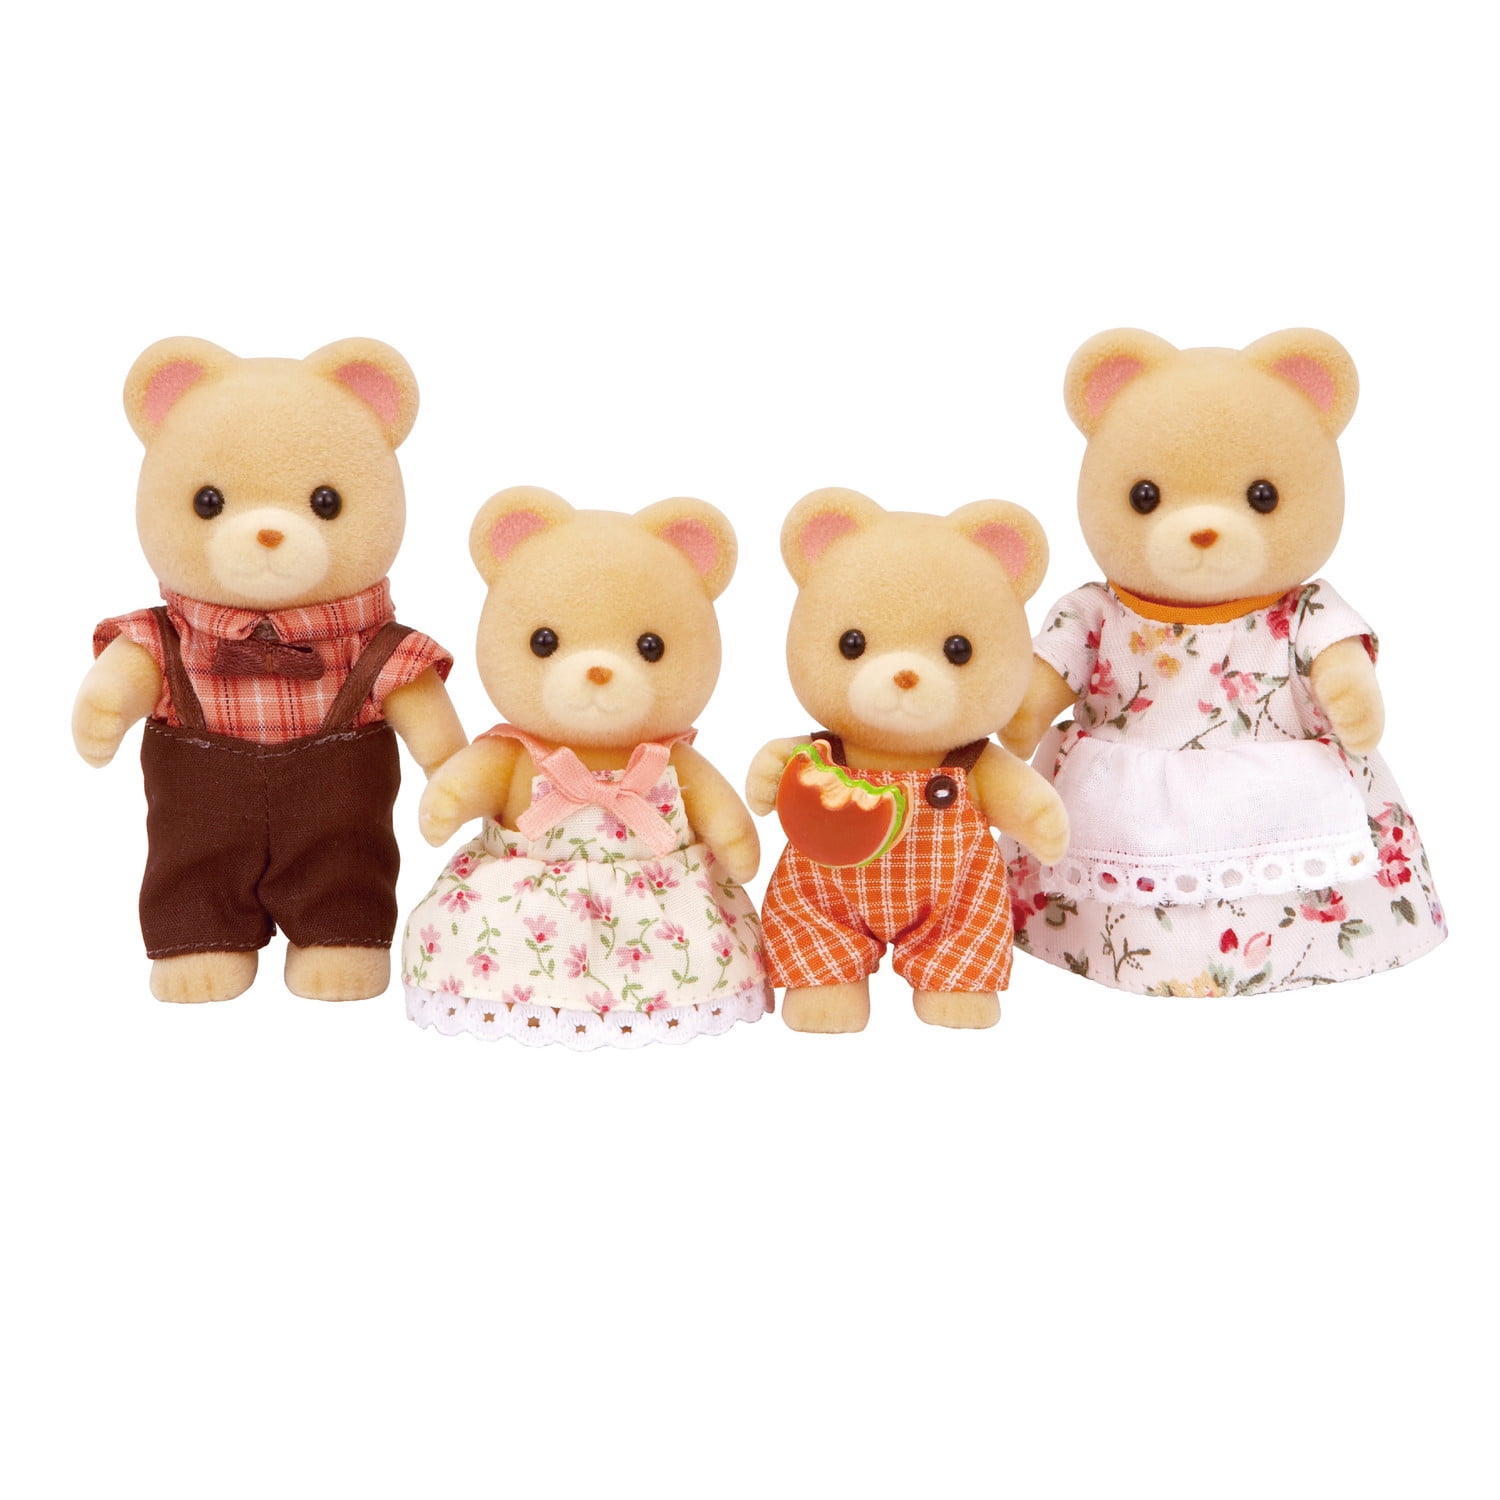 SYLVANIAN FAMILIES CALICO CRITTERS ELLWOODS ELEPHANT FAMILY CHILD BROTHER SISTER 